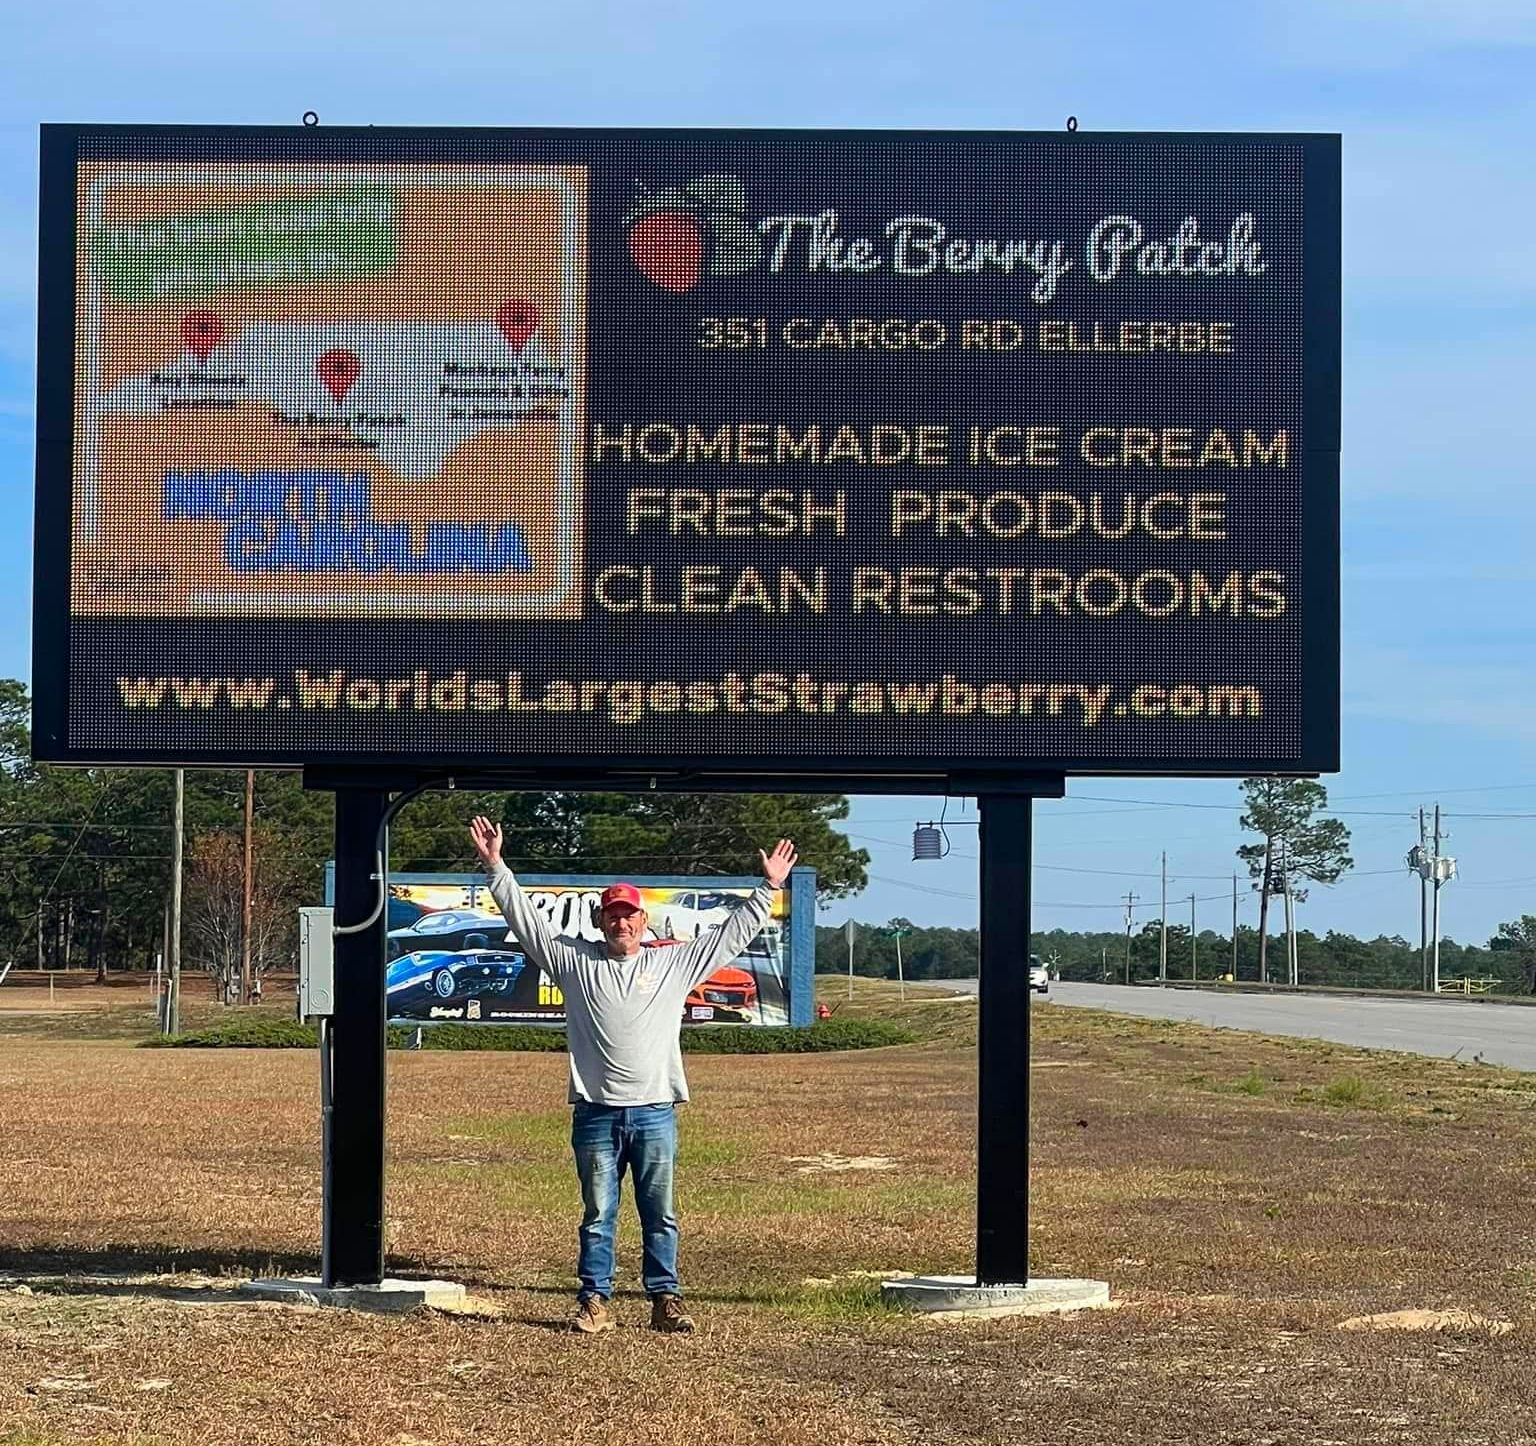 World's Largest Strawberry-shaped Building, world record in Ellerbe, North Carolina
